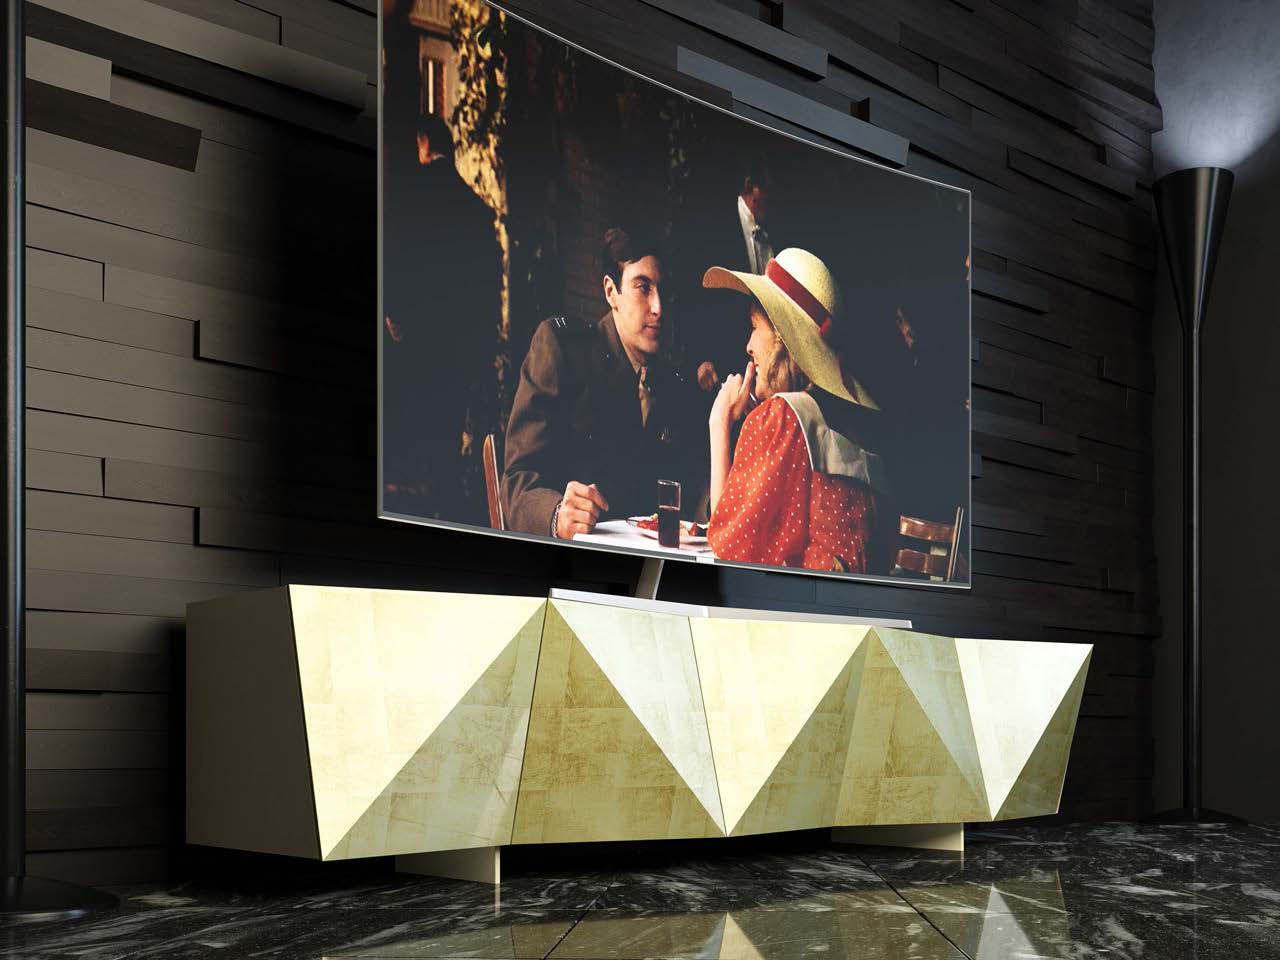 Brands Franco Kora Dining and Wall Units, Spain TVII.02 TV COMPACT